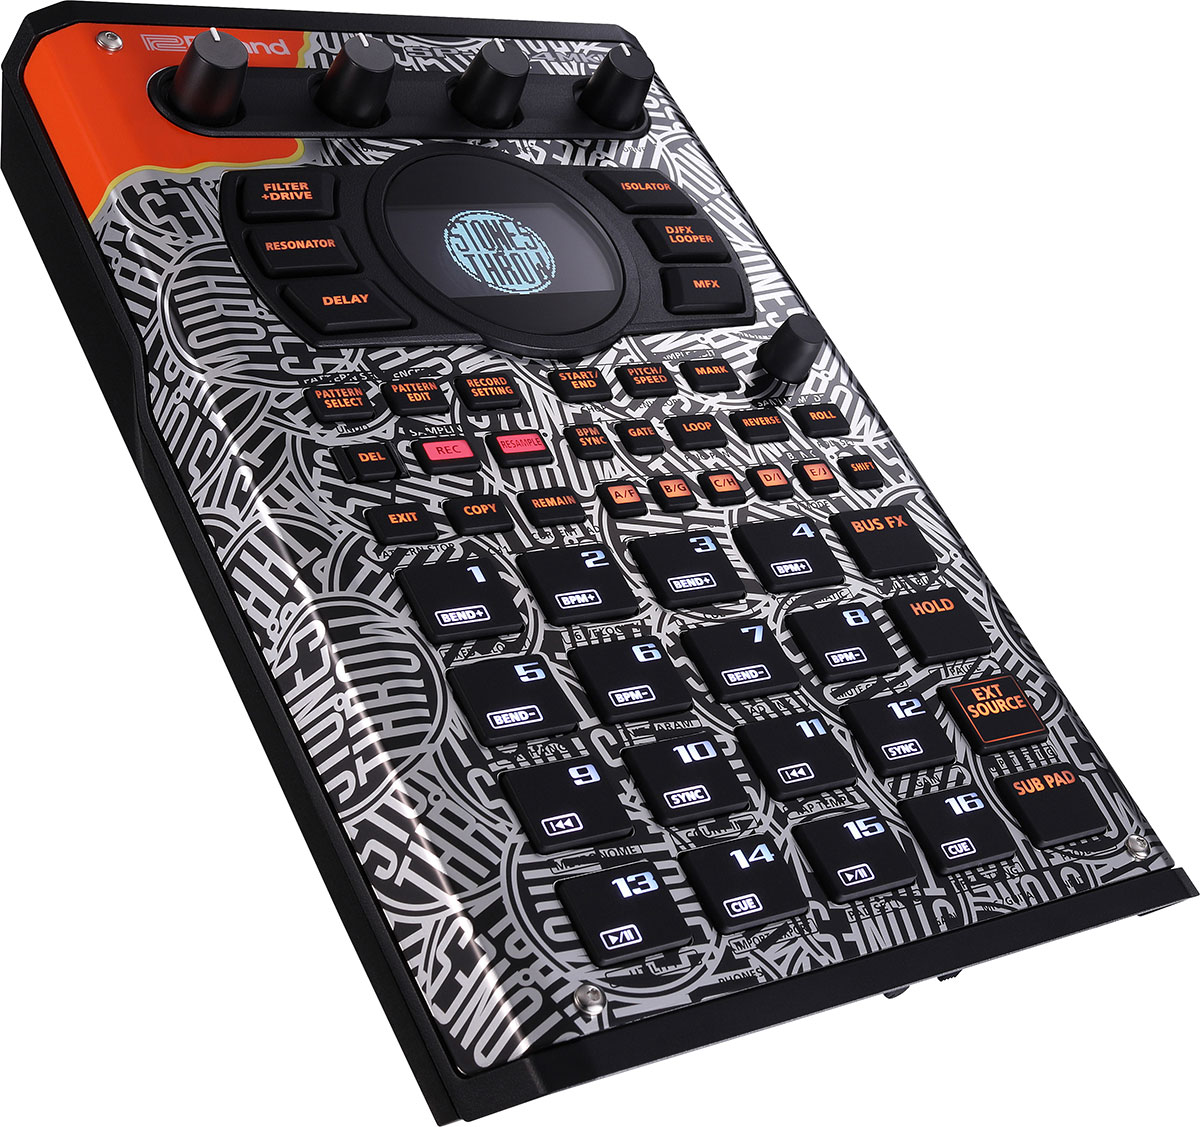 SP-404MKII Stones Throw Limited Edition